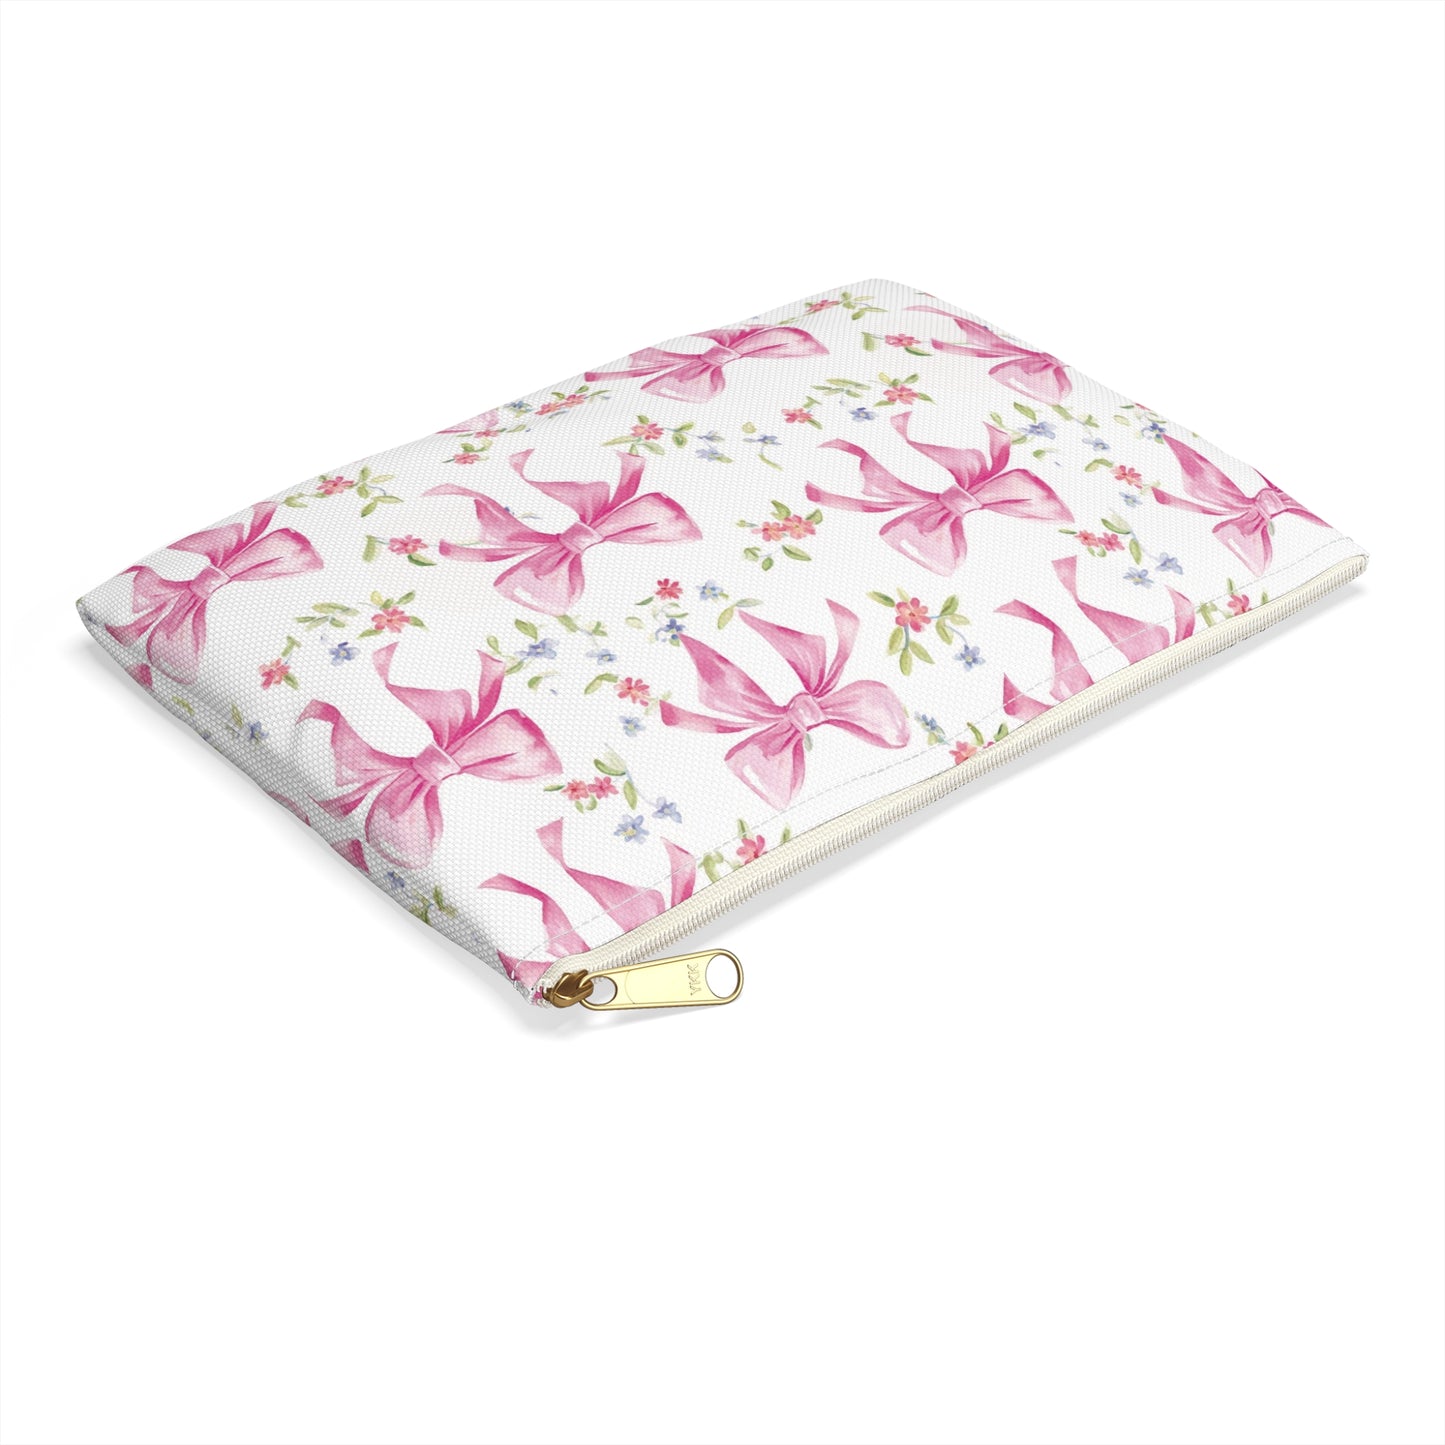 LP- Pink Bow Accessory Pouch